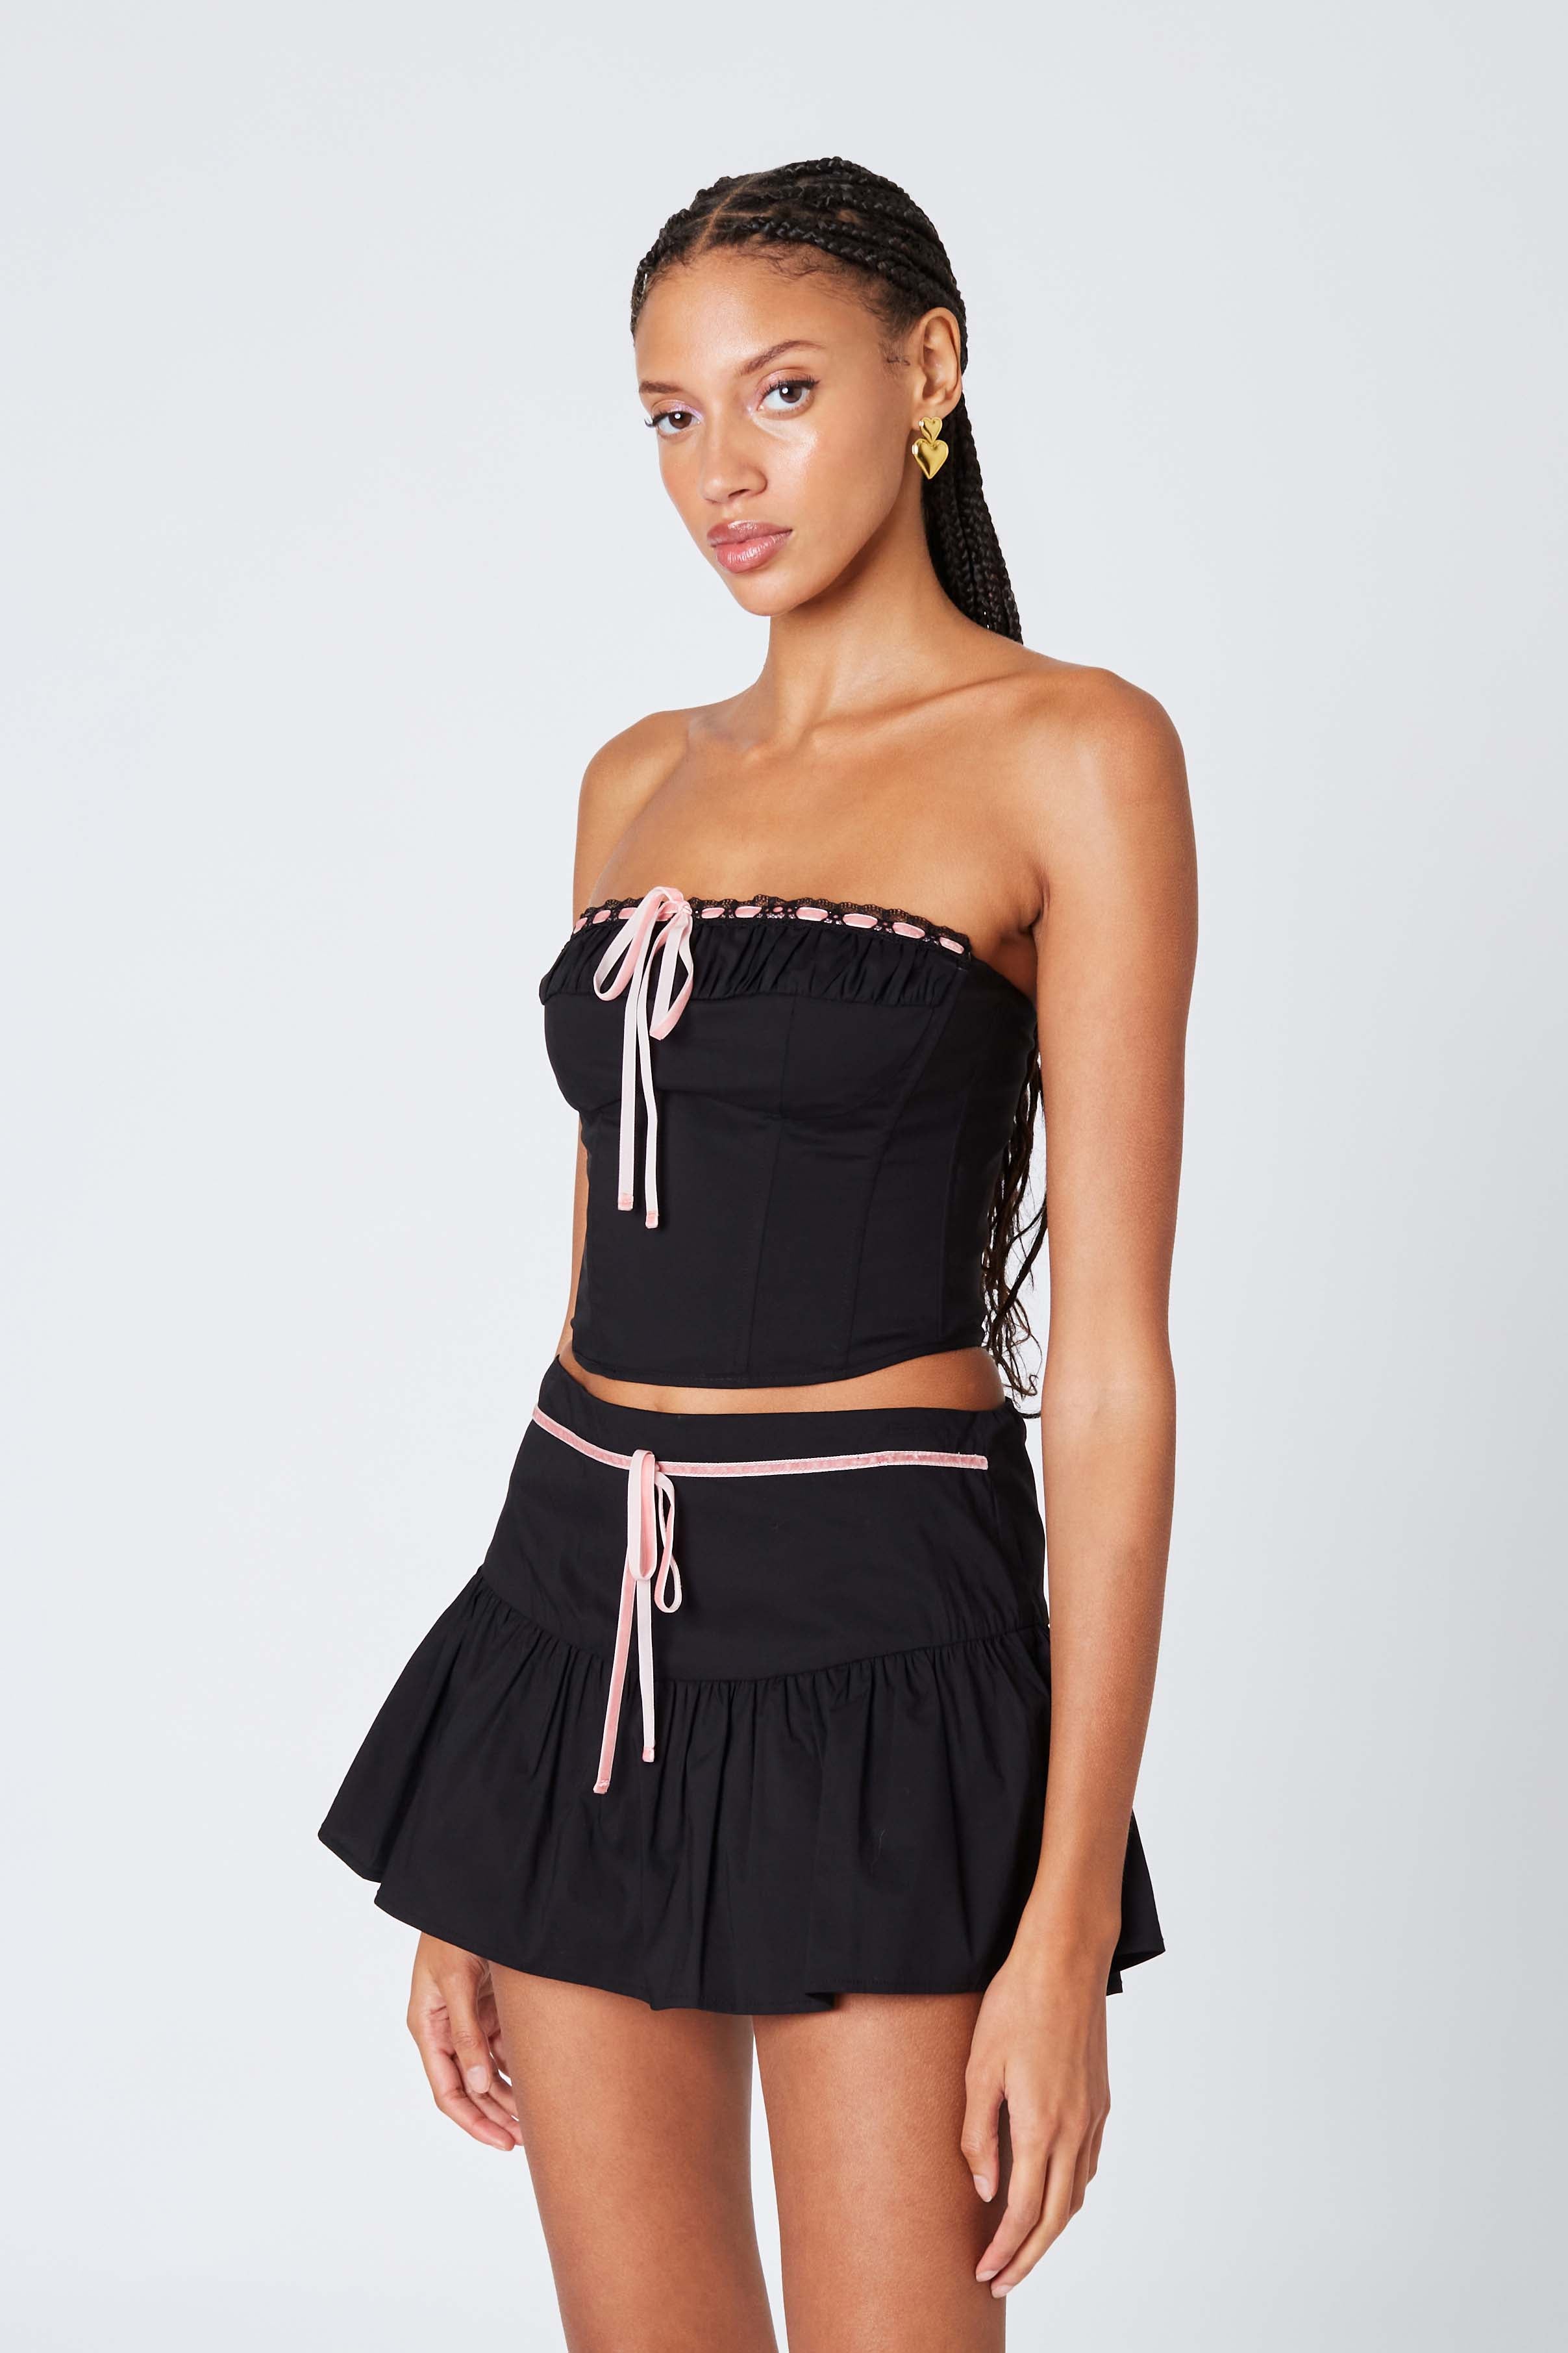 Strapless Pleated Corset in Black Side View